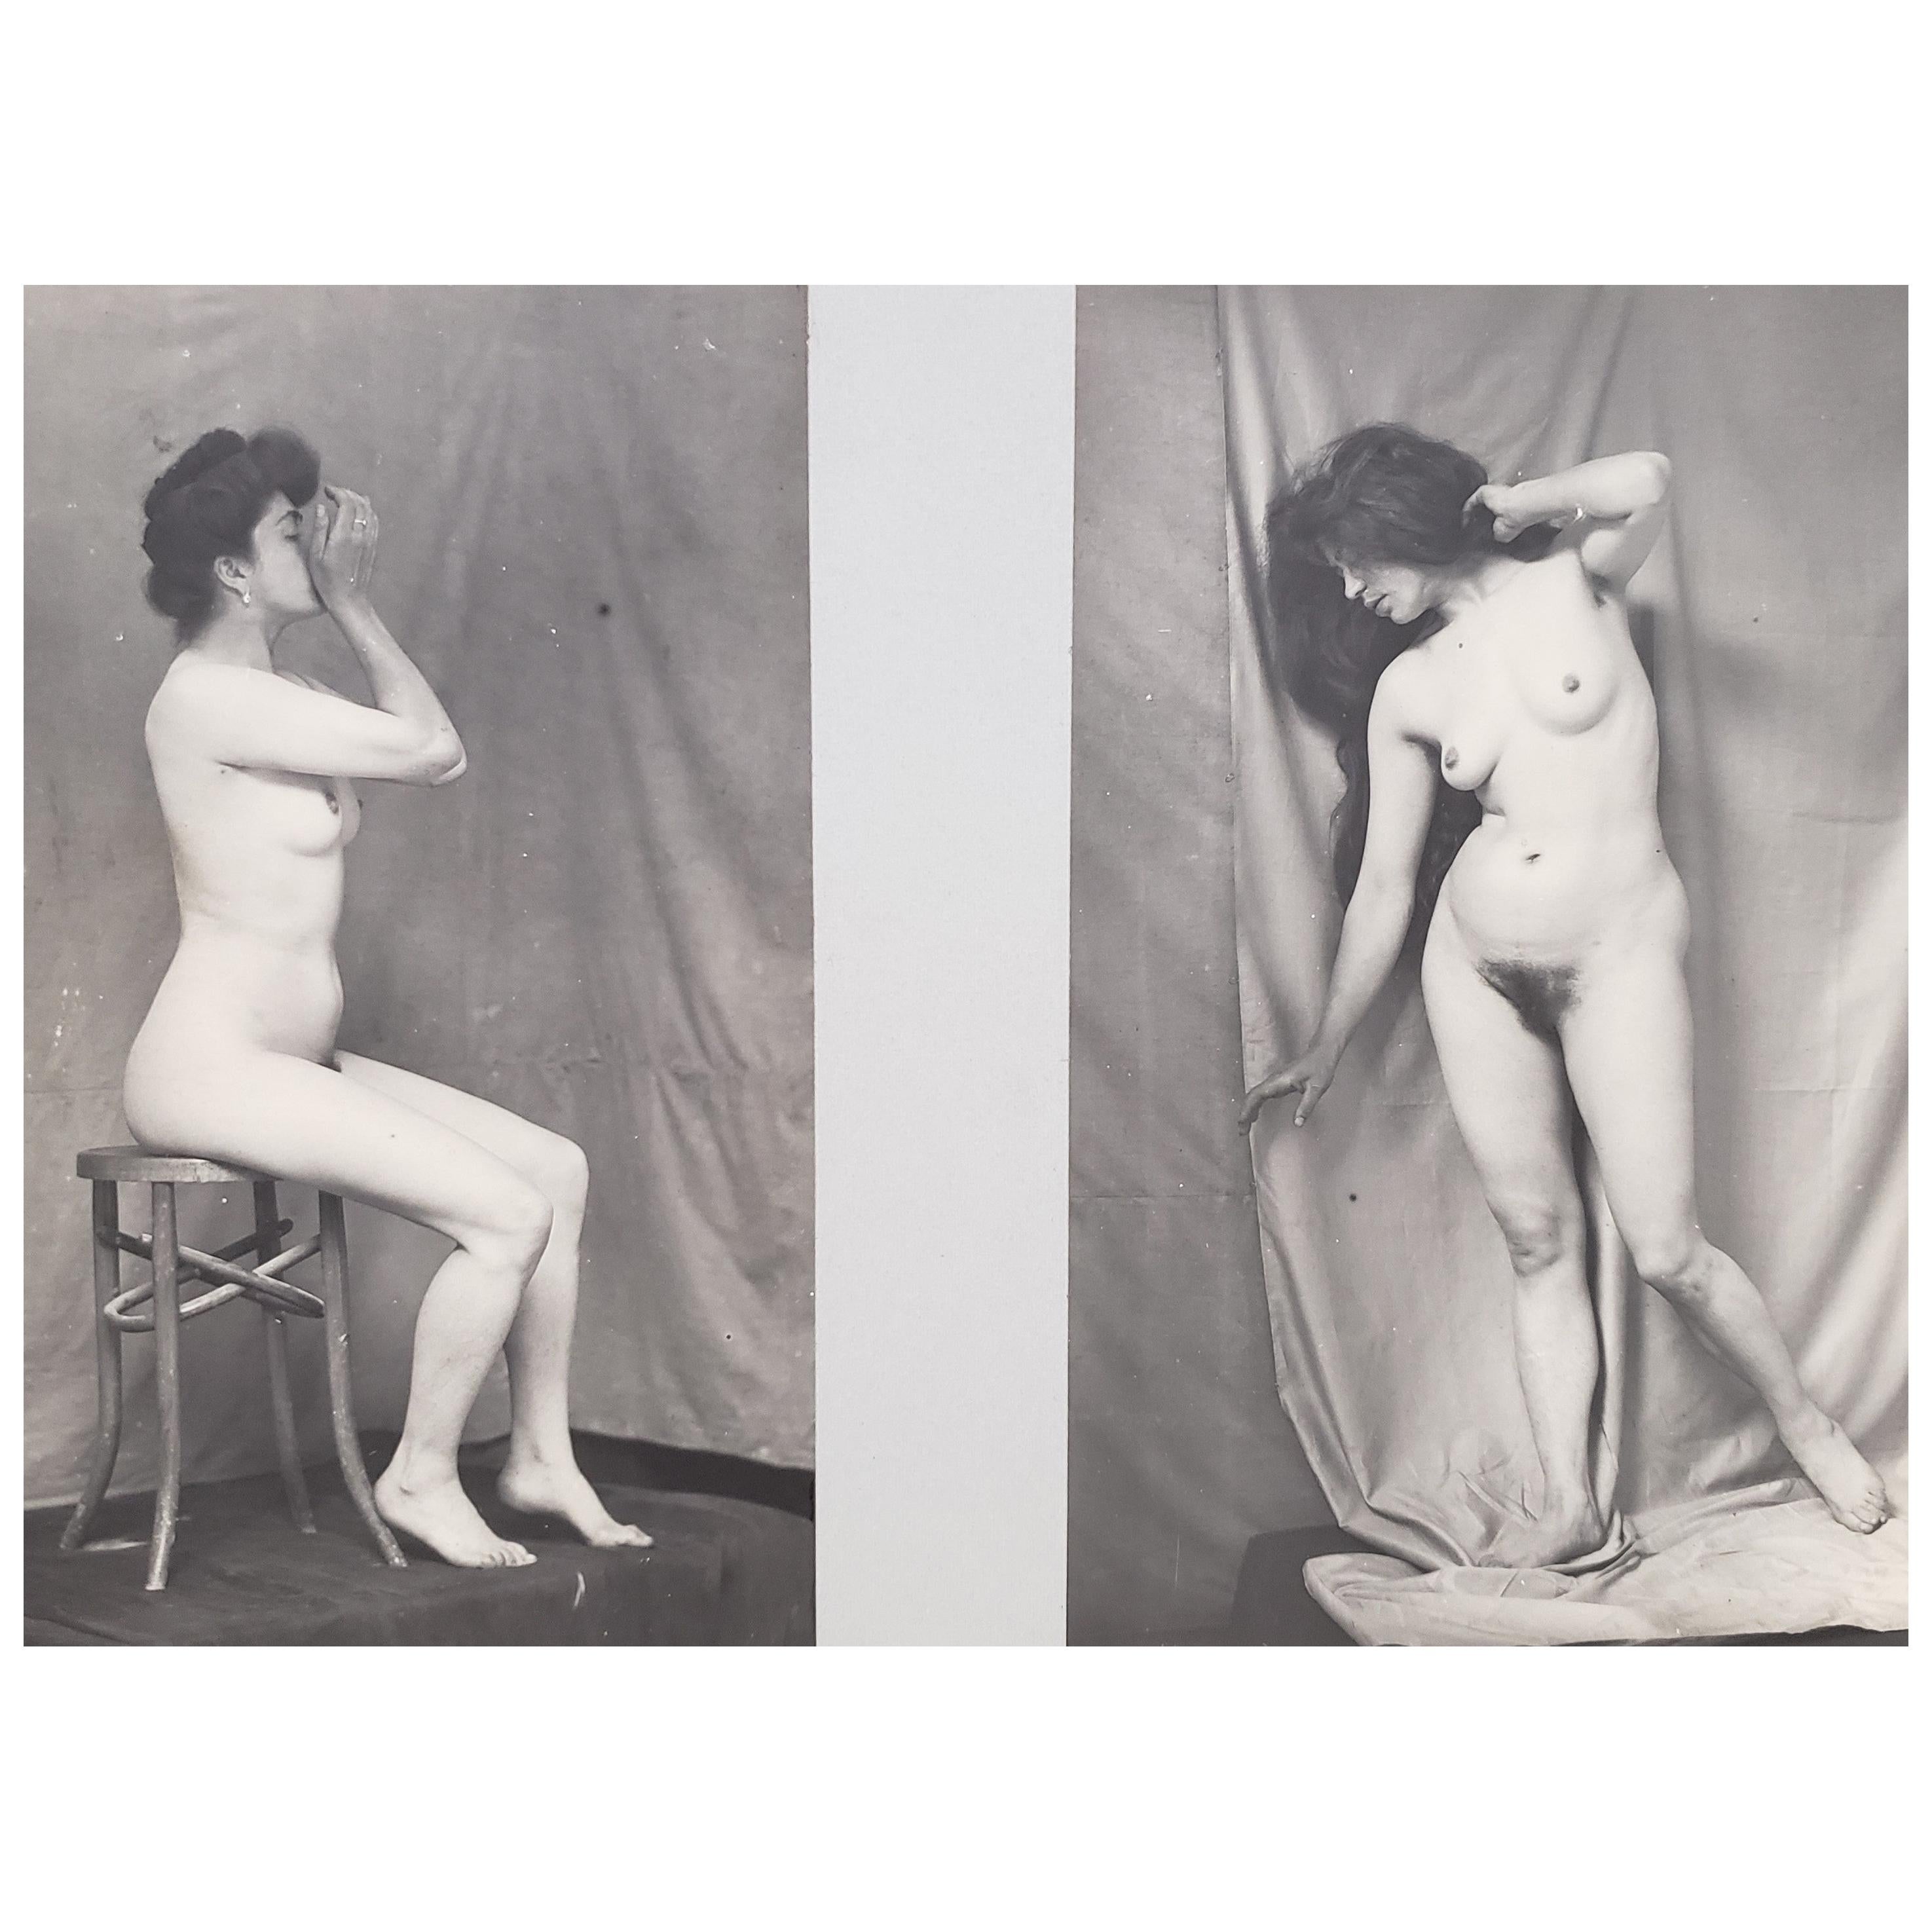 Early 20th Century French Erotica Nude Art Photographs